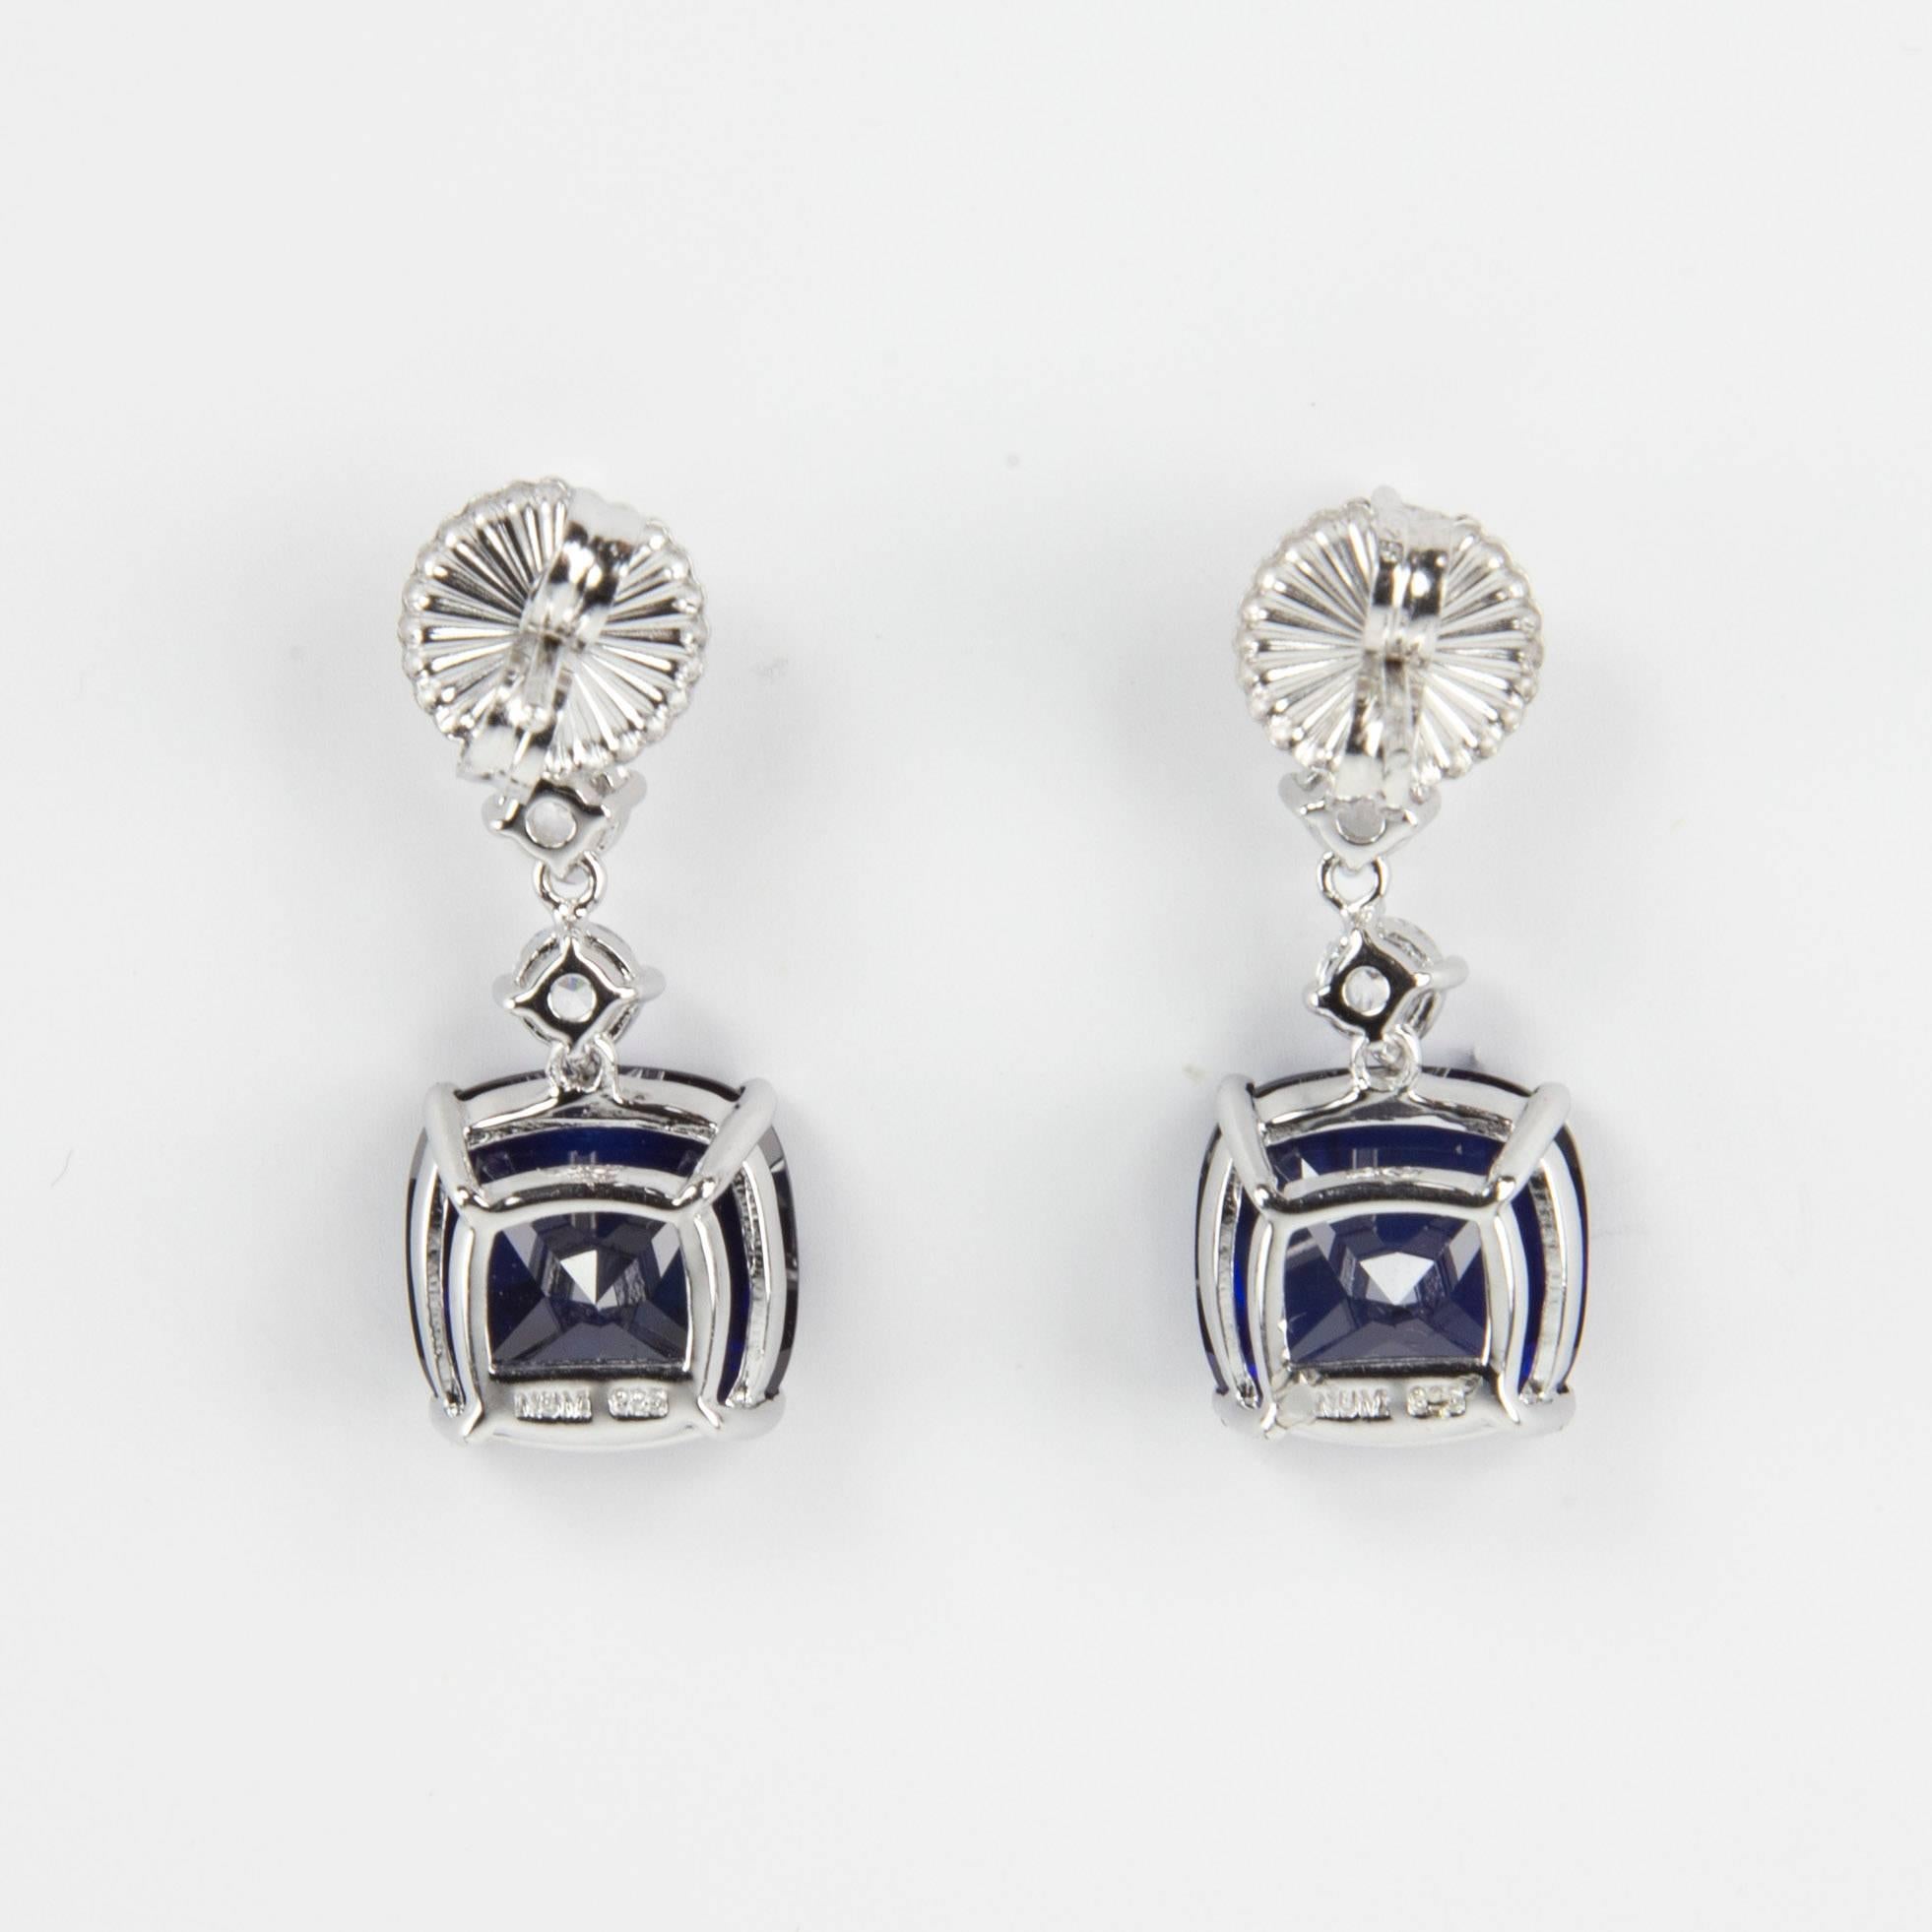 Simply Beautiful…each dangle earring is set with a 6mm, 5mm and 4mm round Faux Diamond, suspends a large 22mm square cushion shape faux Blue Sapphire, making a striking statement! All hand set in Sterling Silver. Approx. total length 1.25